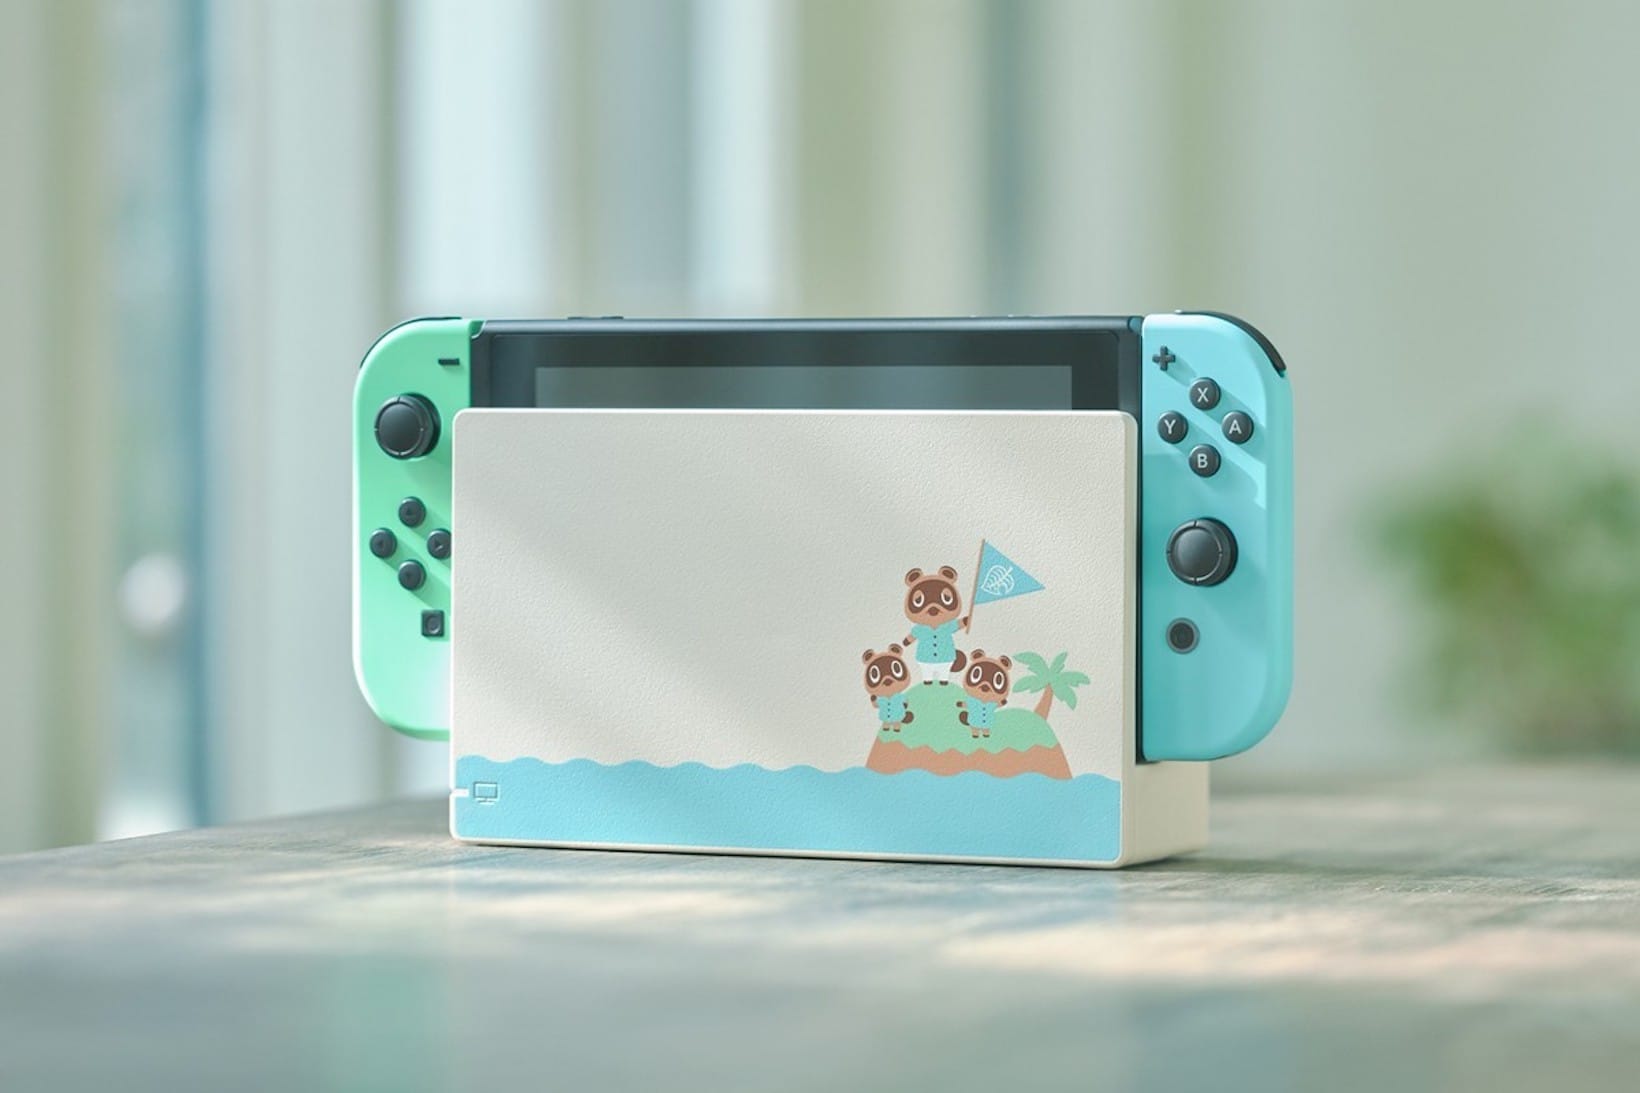 switch console sold out